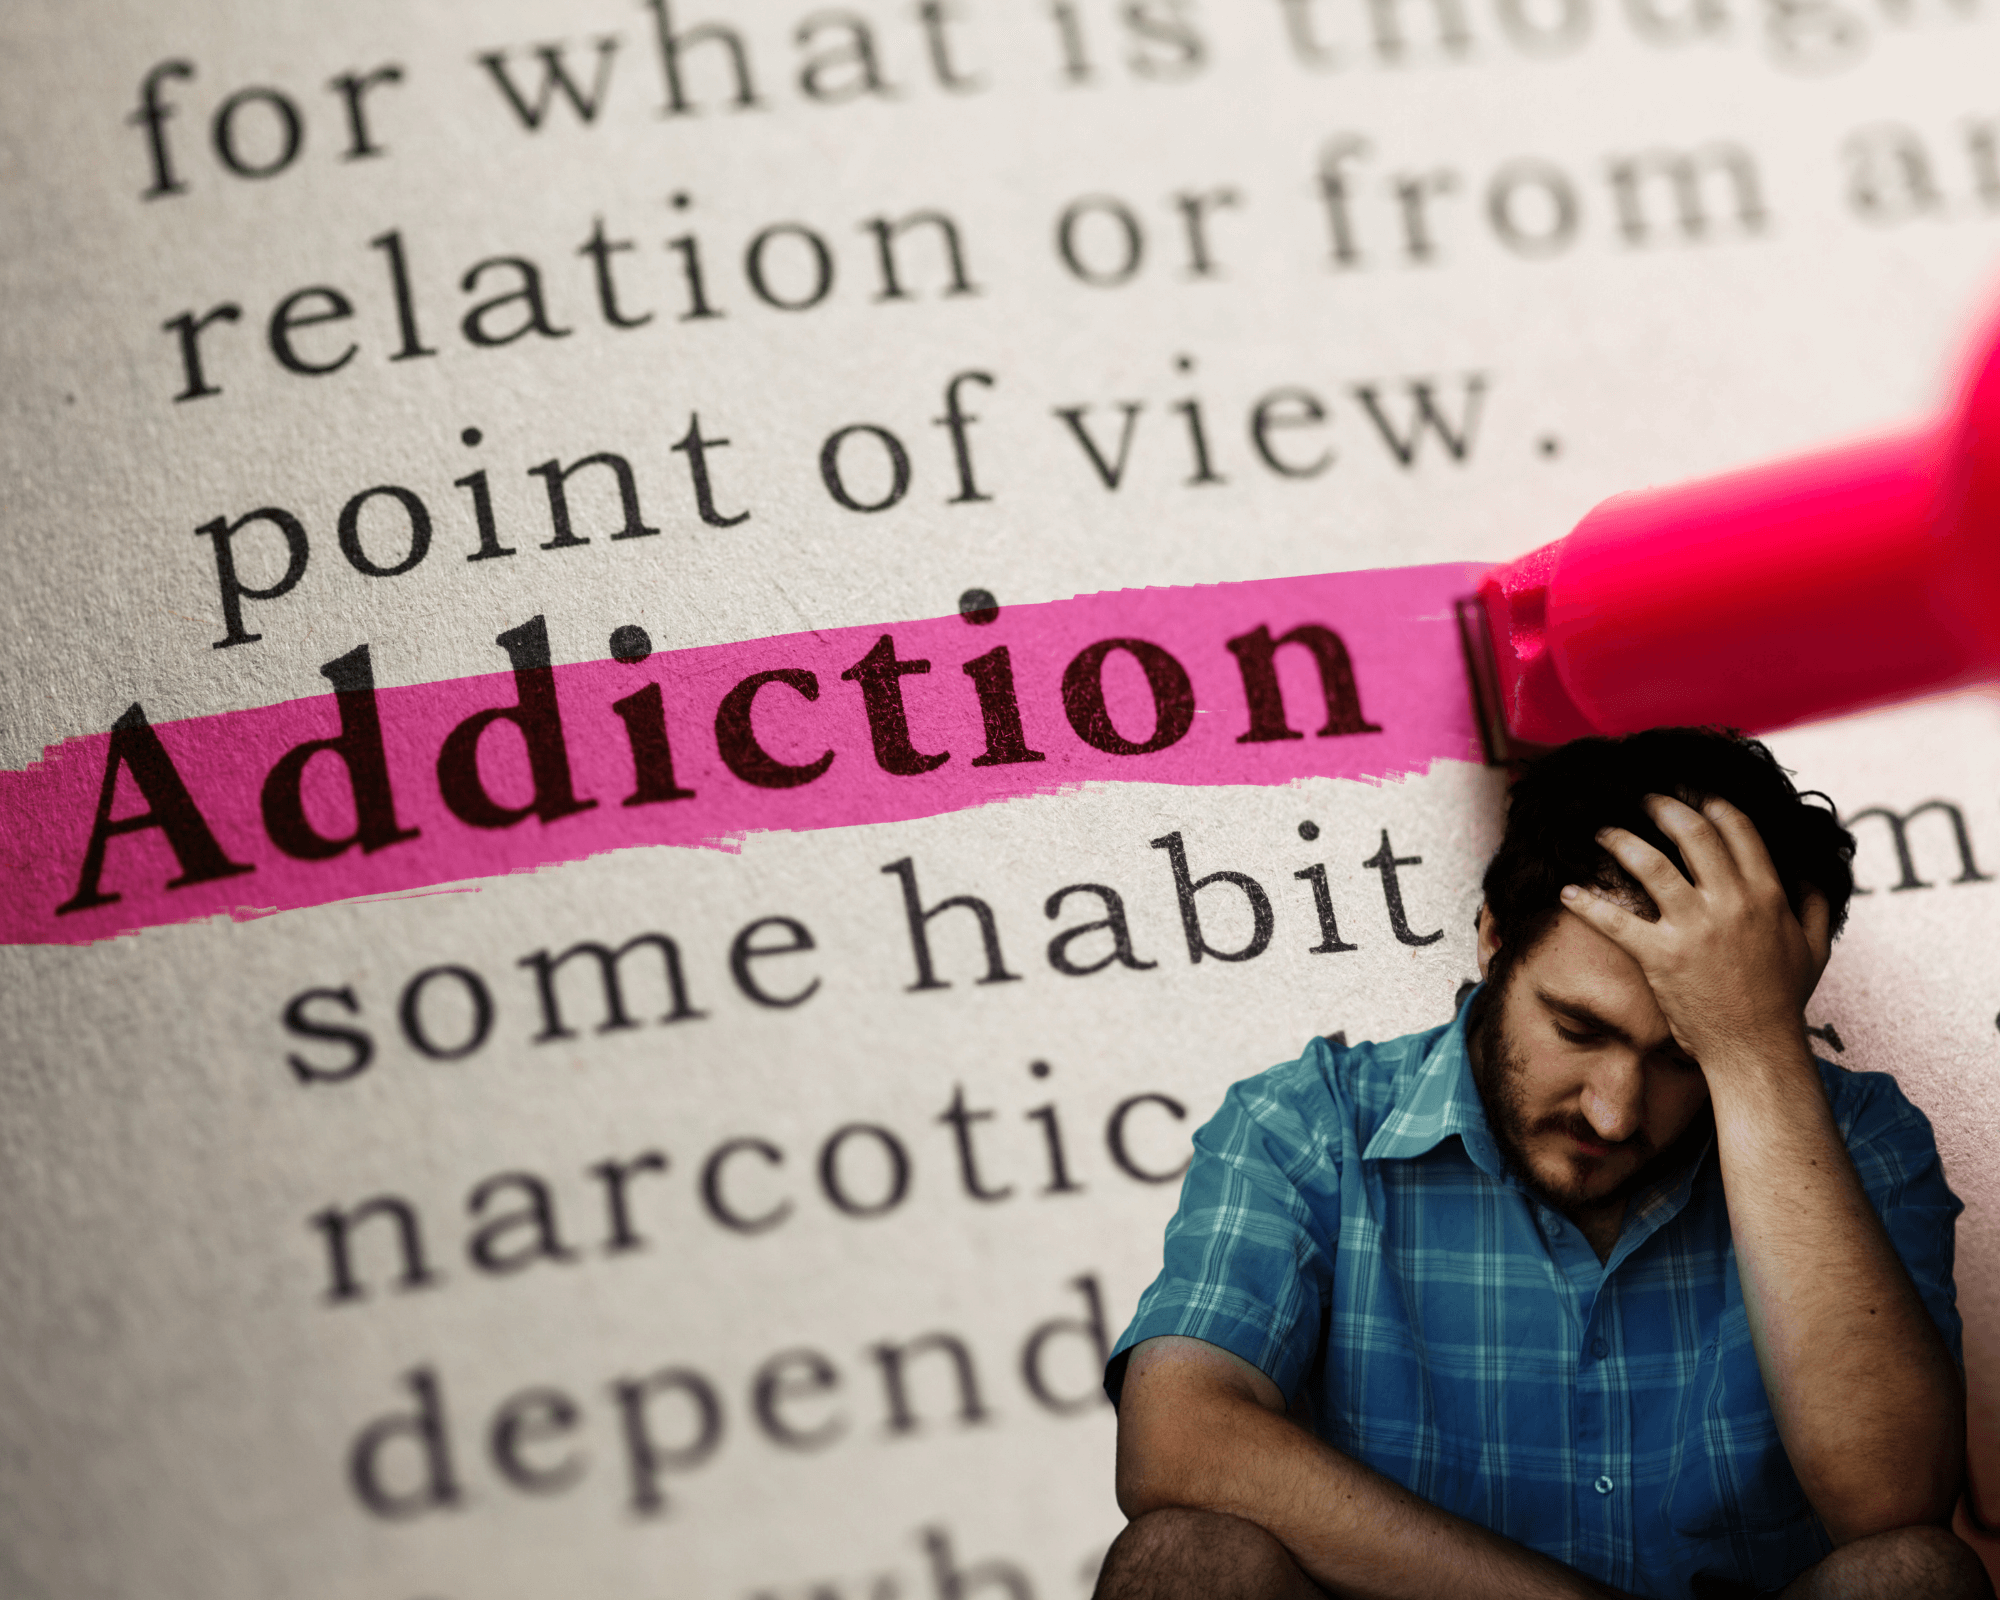 drug addiction about topic